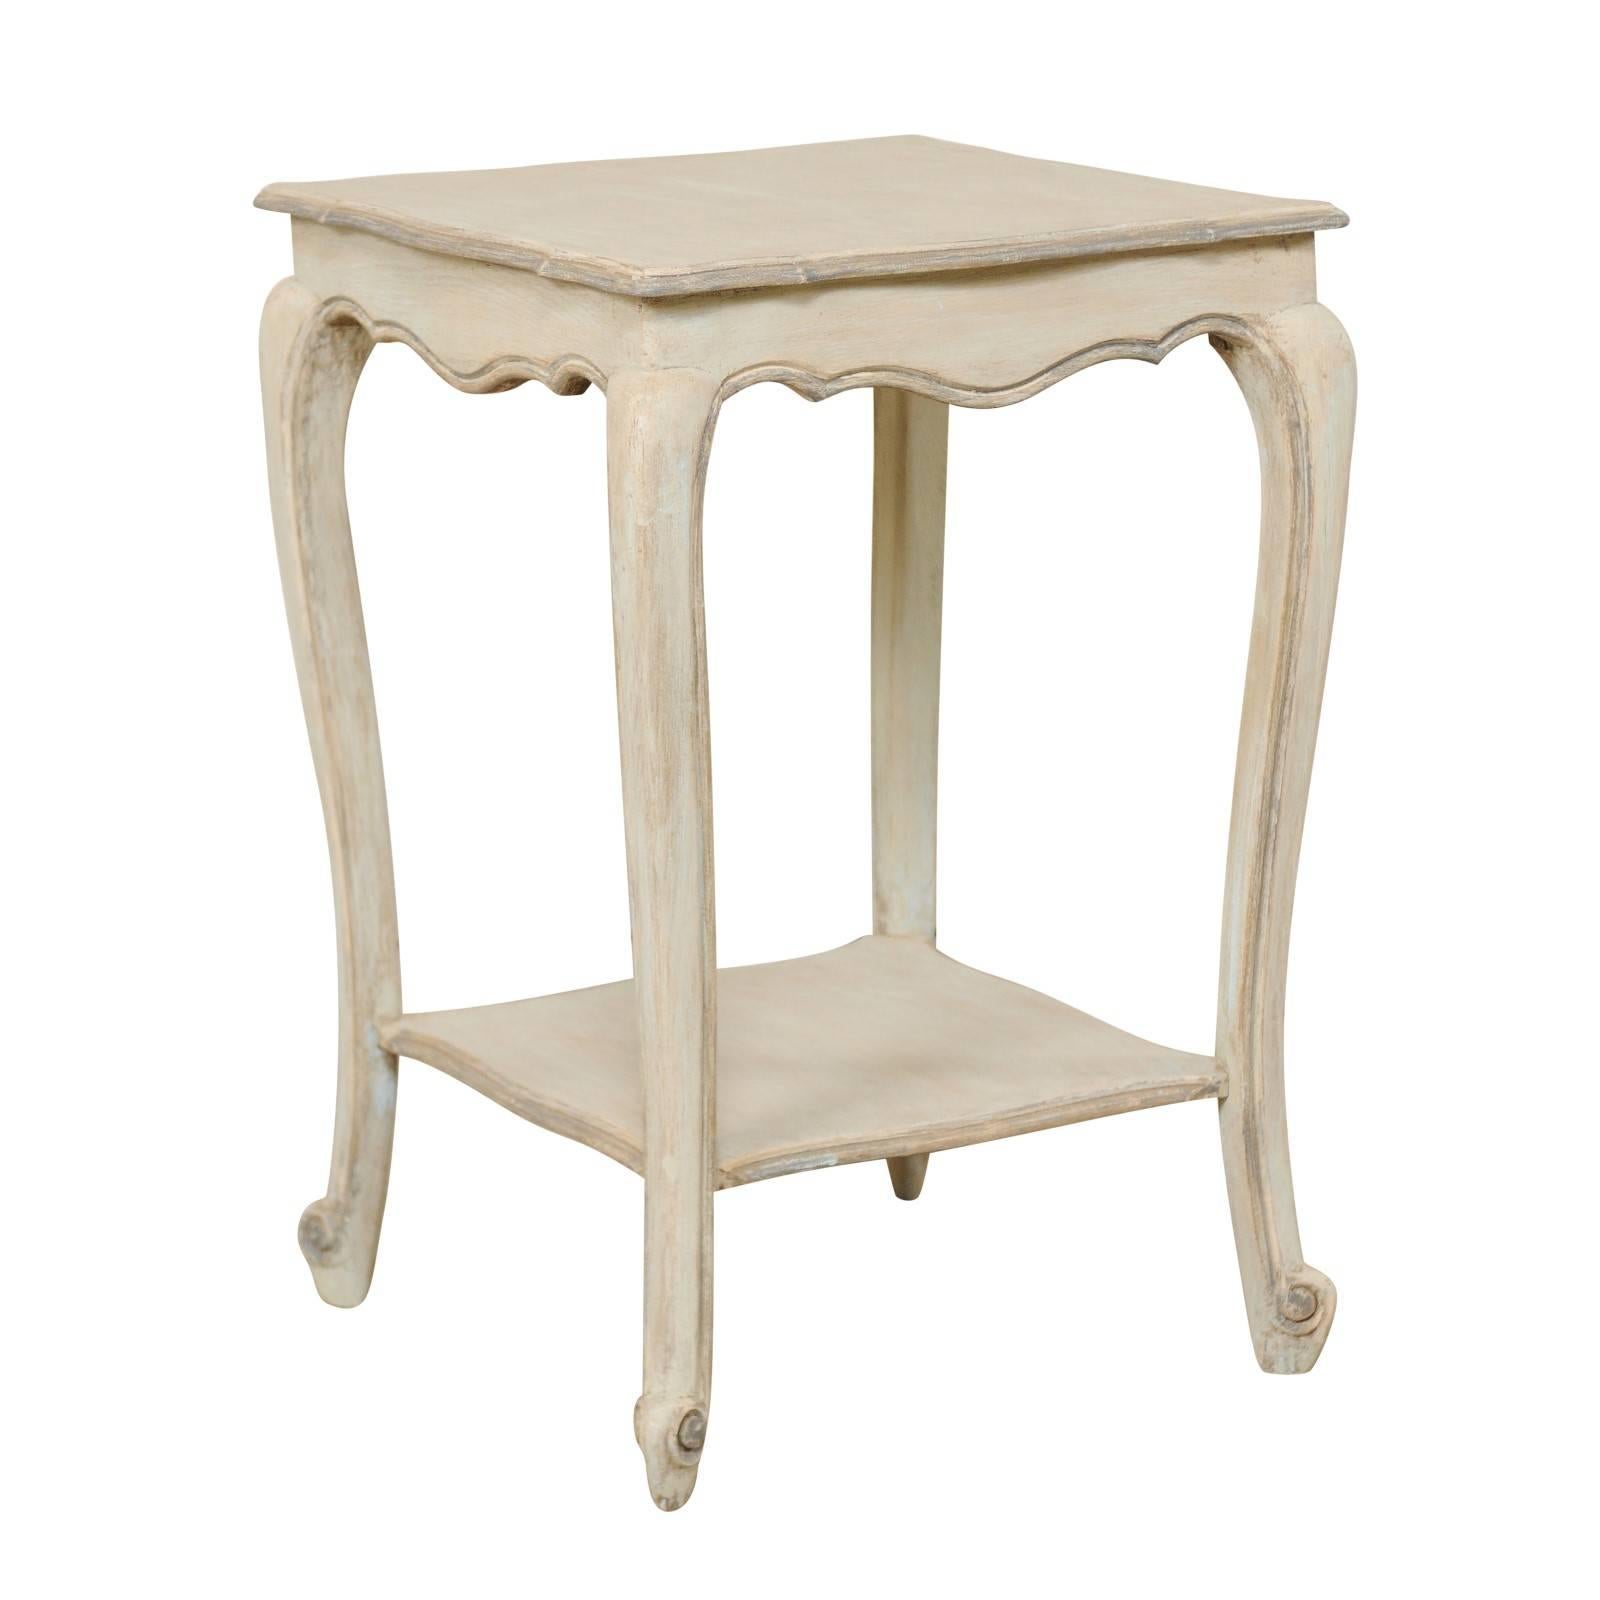 Vintage French Early 20th Century Painted Wood Side Table in Soft Pale Blue-Grey